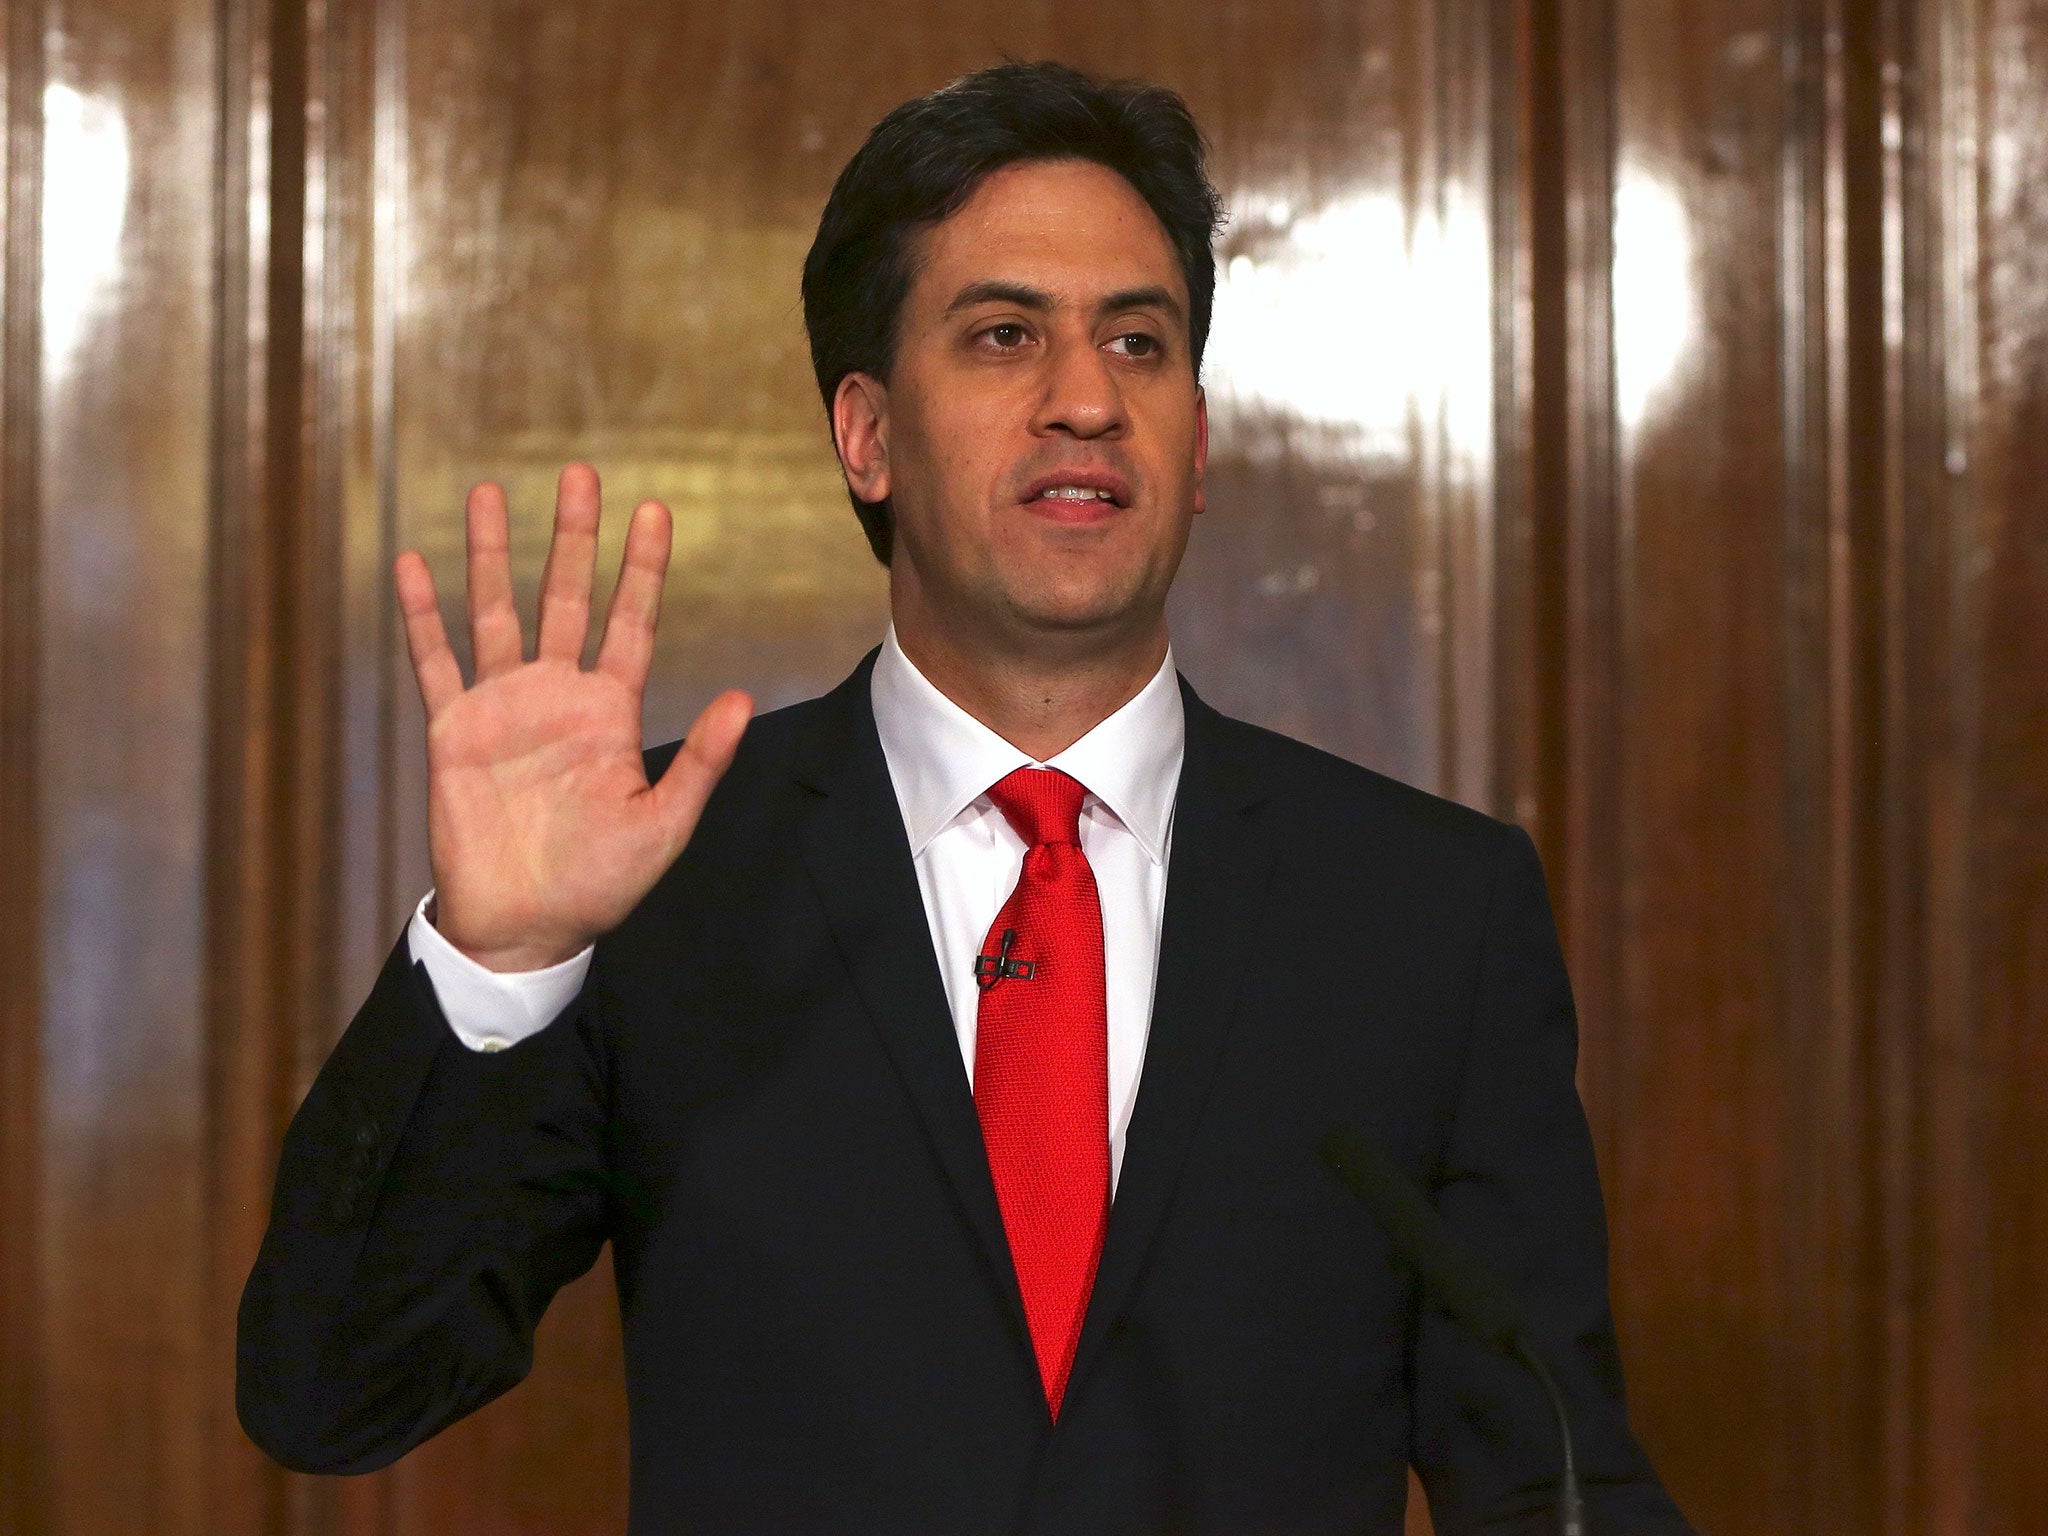 If London were a city-state, Ed Miliband would have been installed as Prime Minister